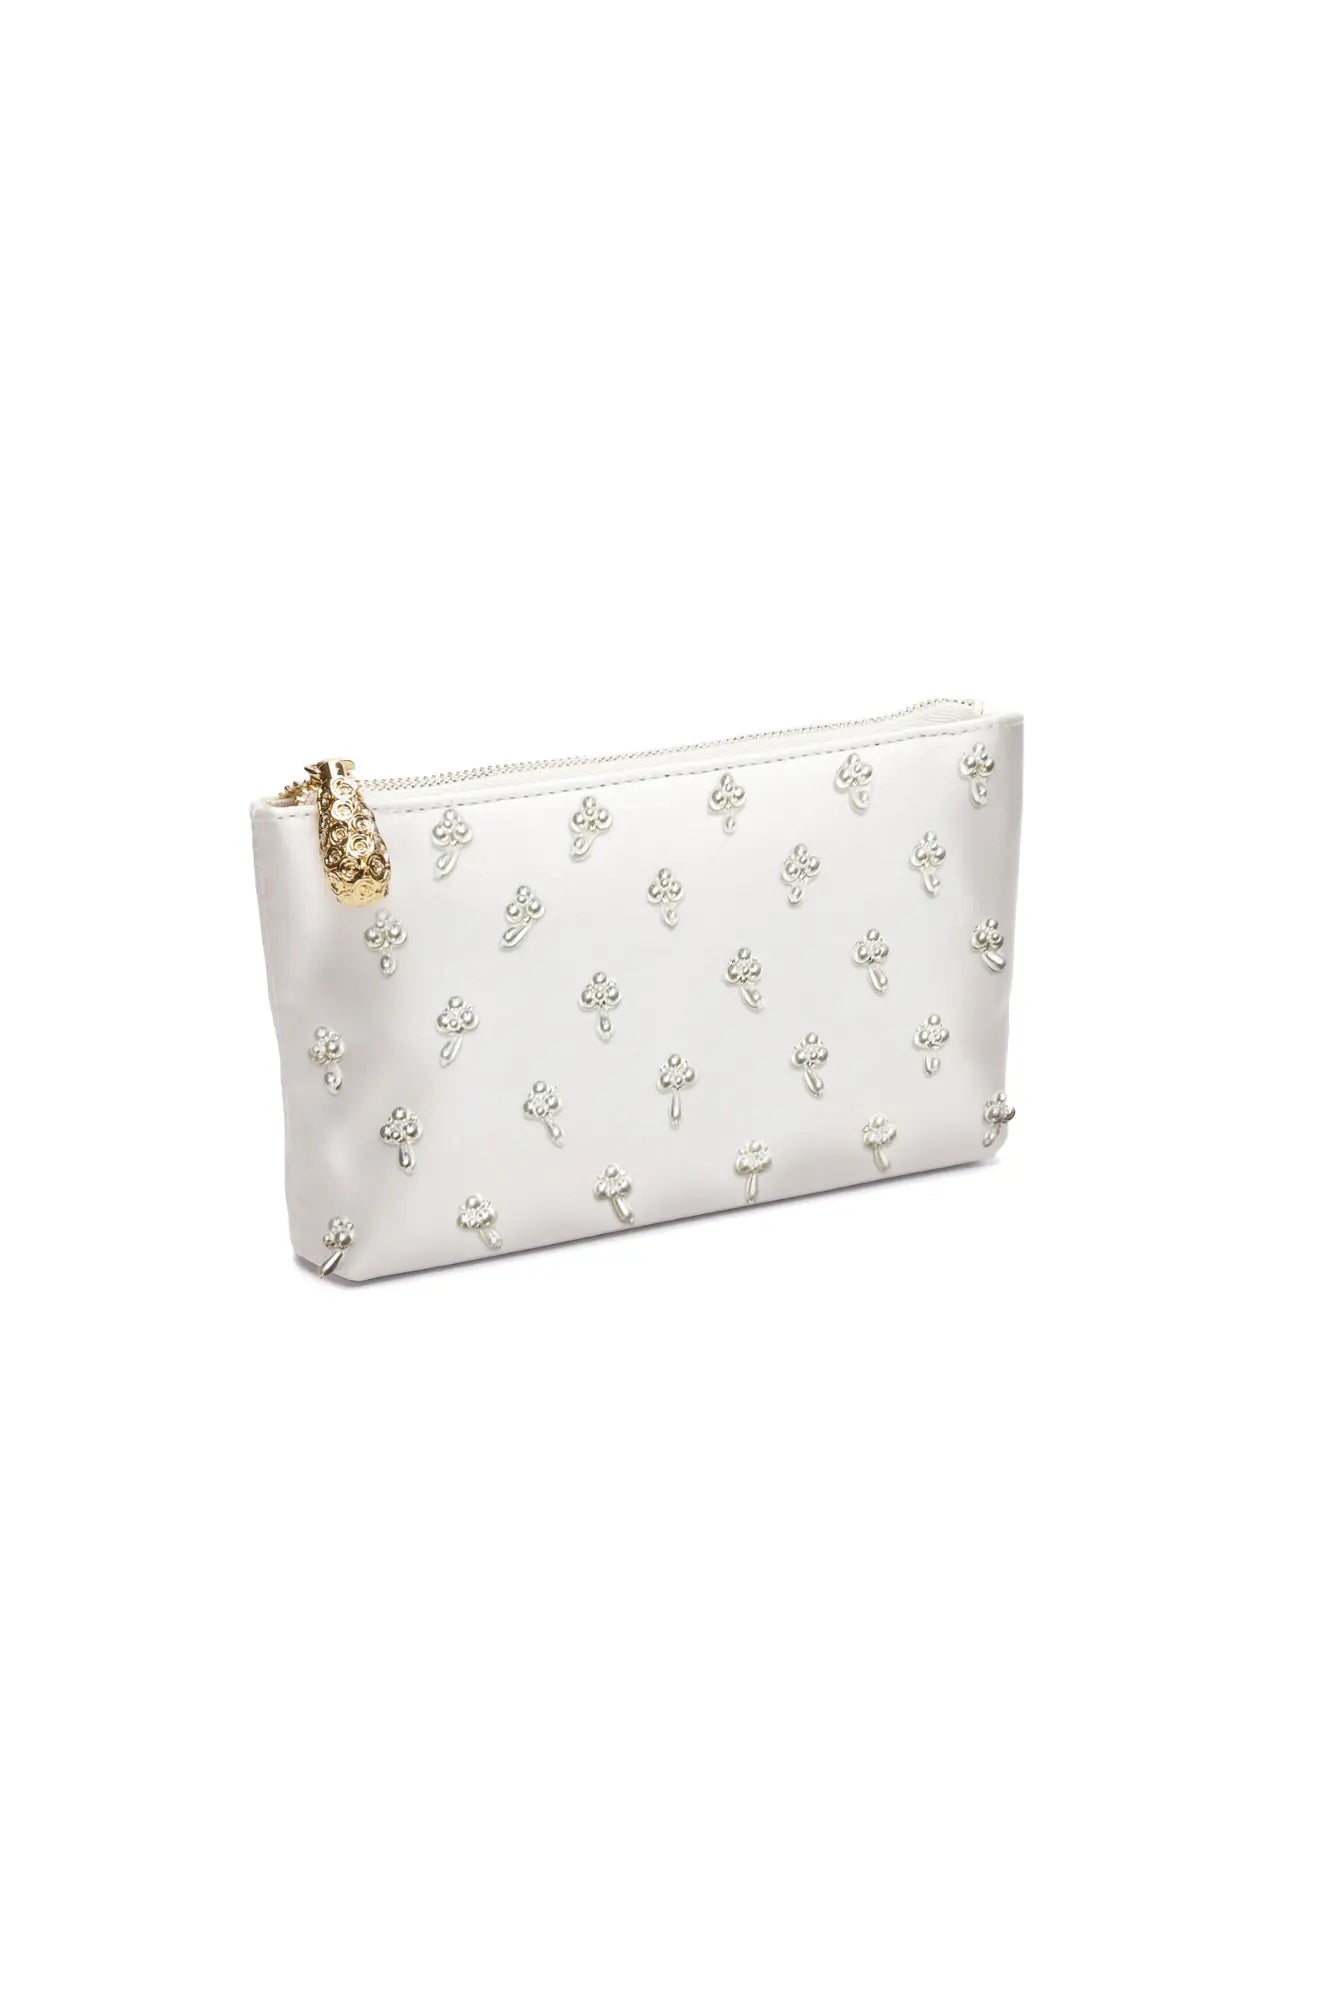 Hayden clutch bag with silver bee embellishments and a gold Duches satin zipper from The Bella Rosa Collection.